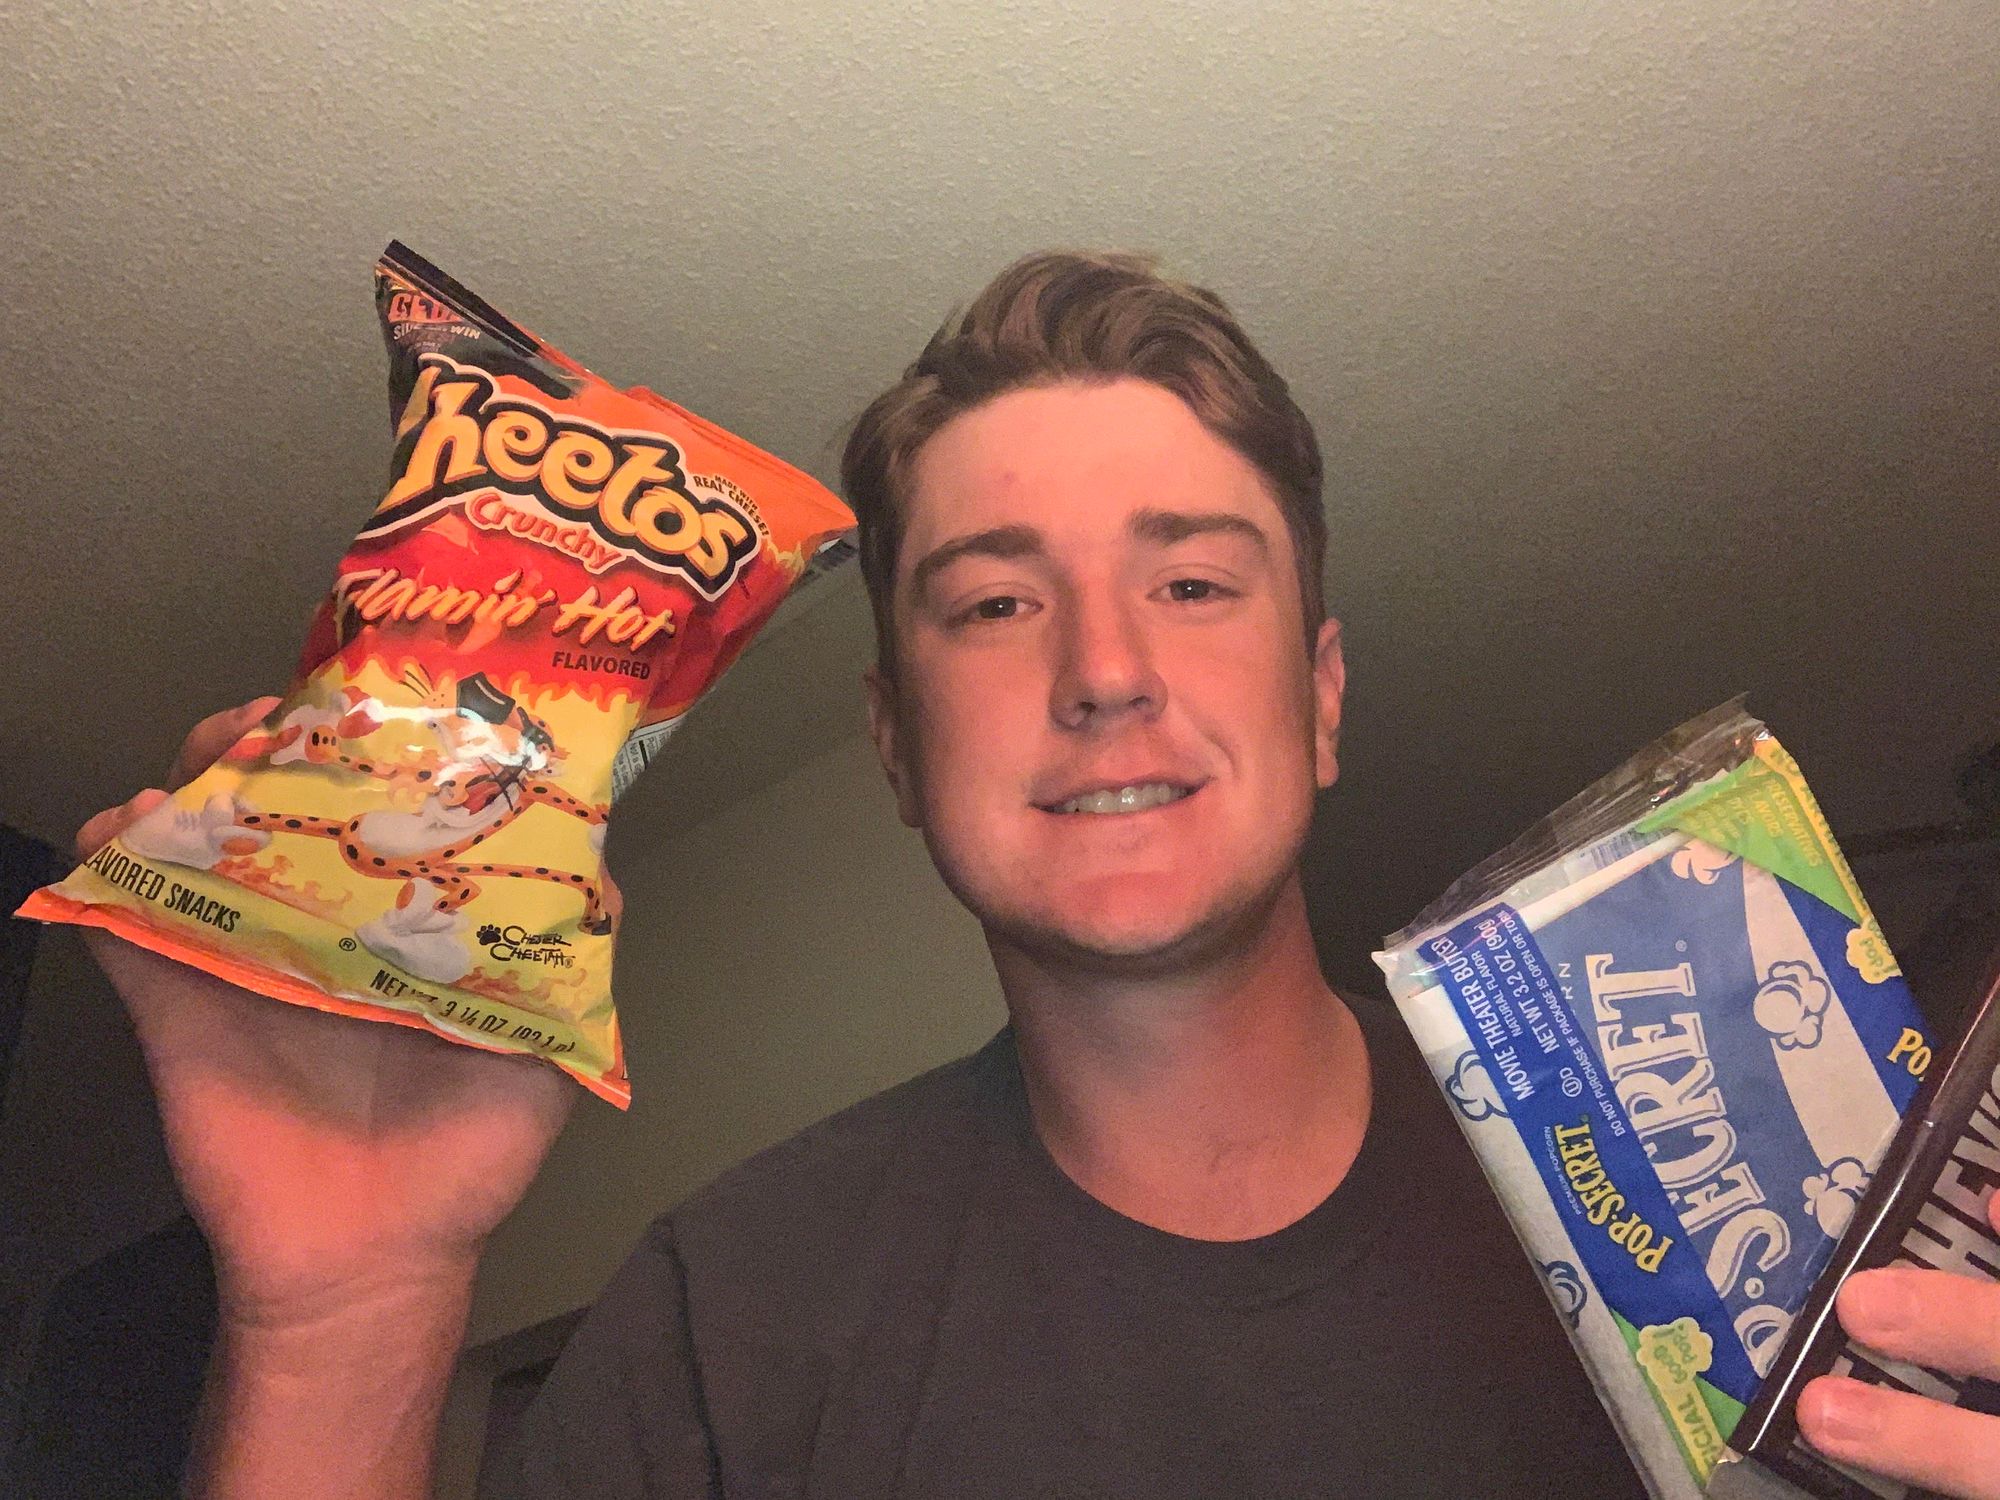 Craving a snack? Here's some of my favorite ones